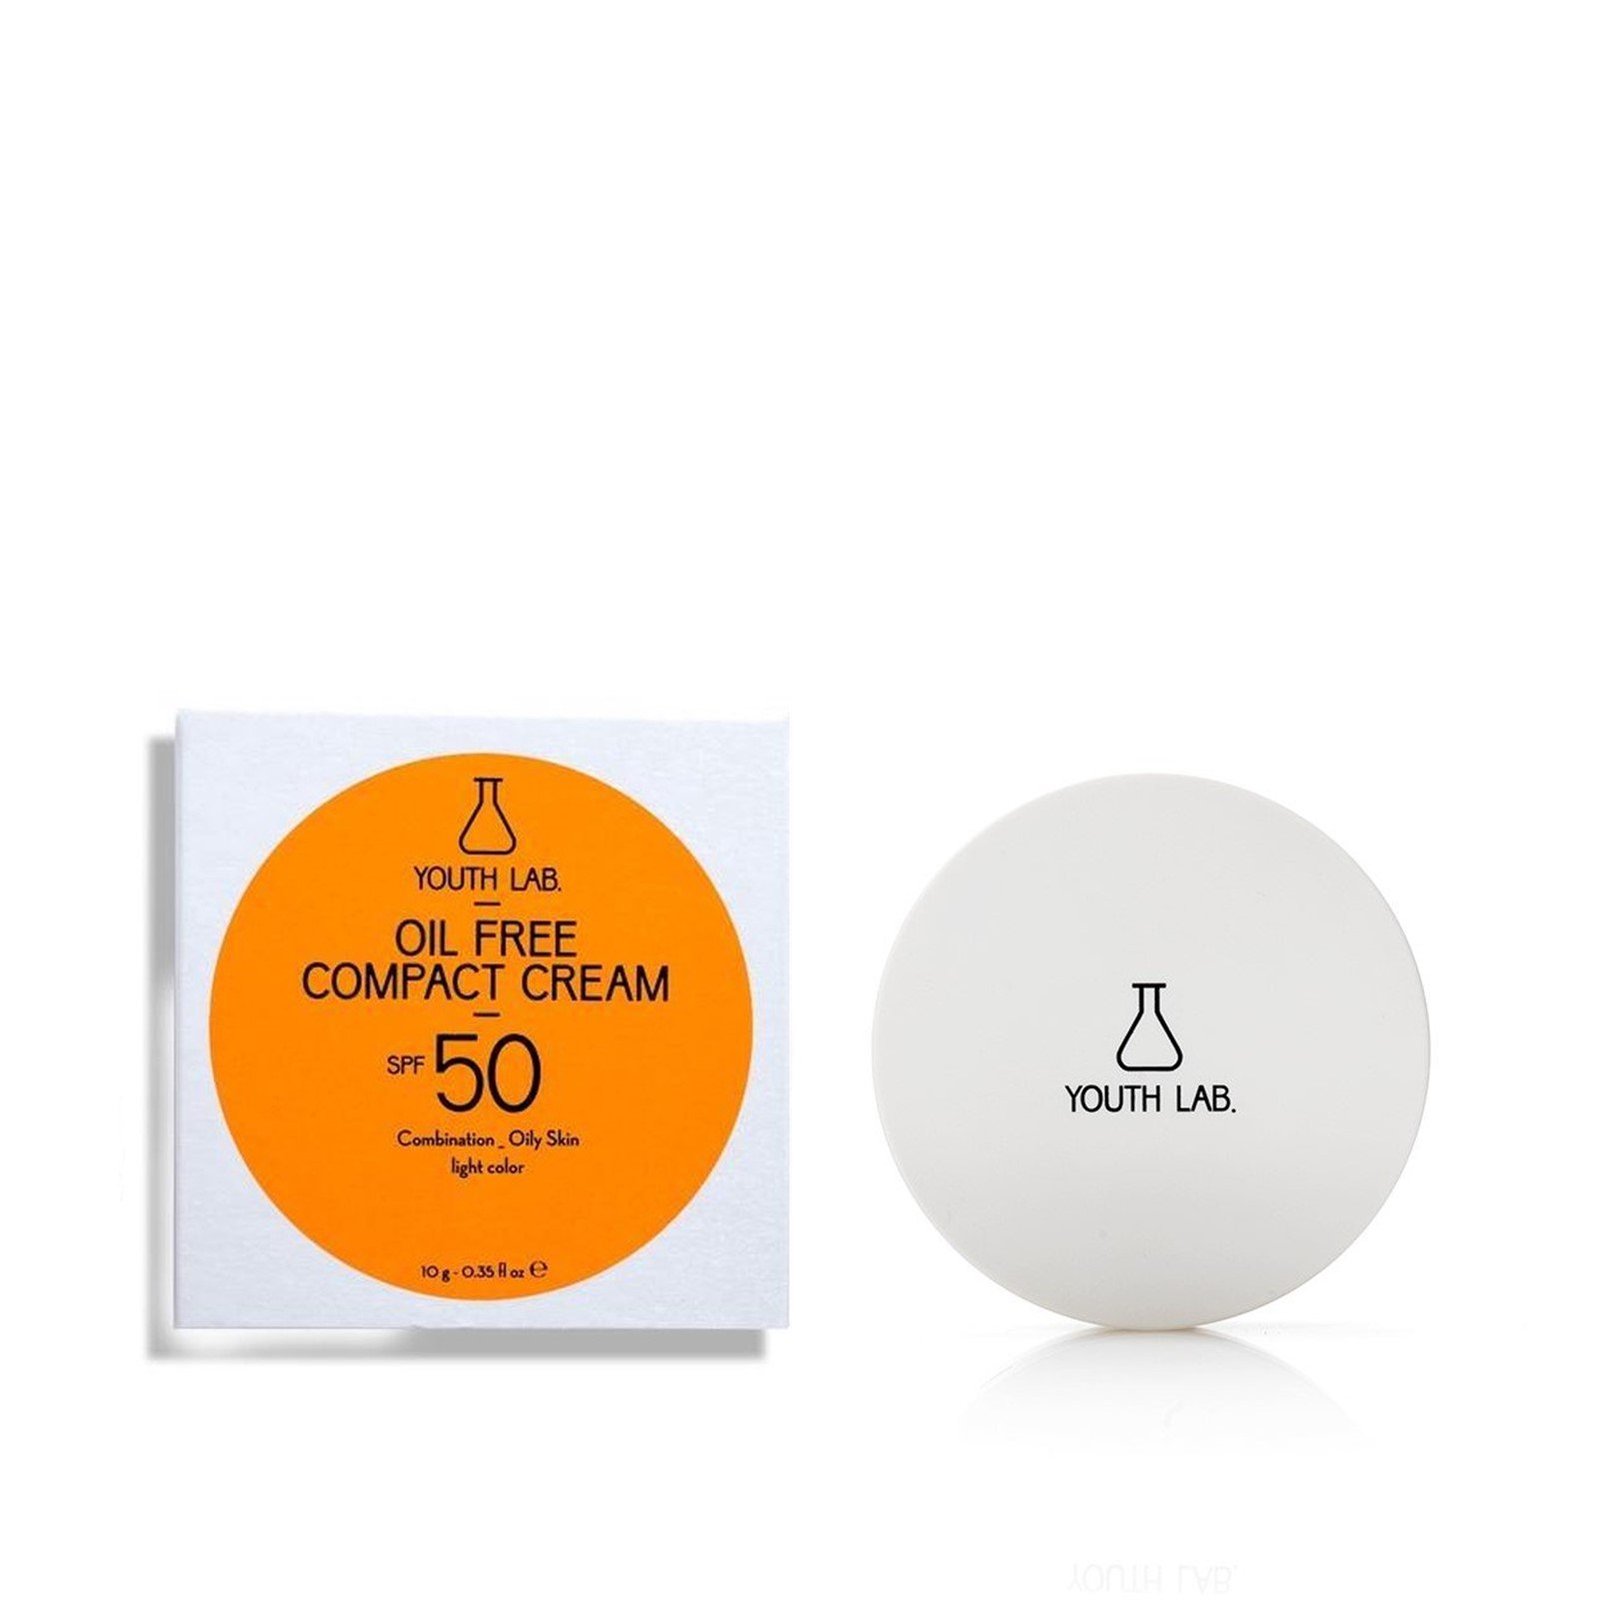 YOUTH LAB Oil Free Compact Cream SPF50 Light 10g